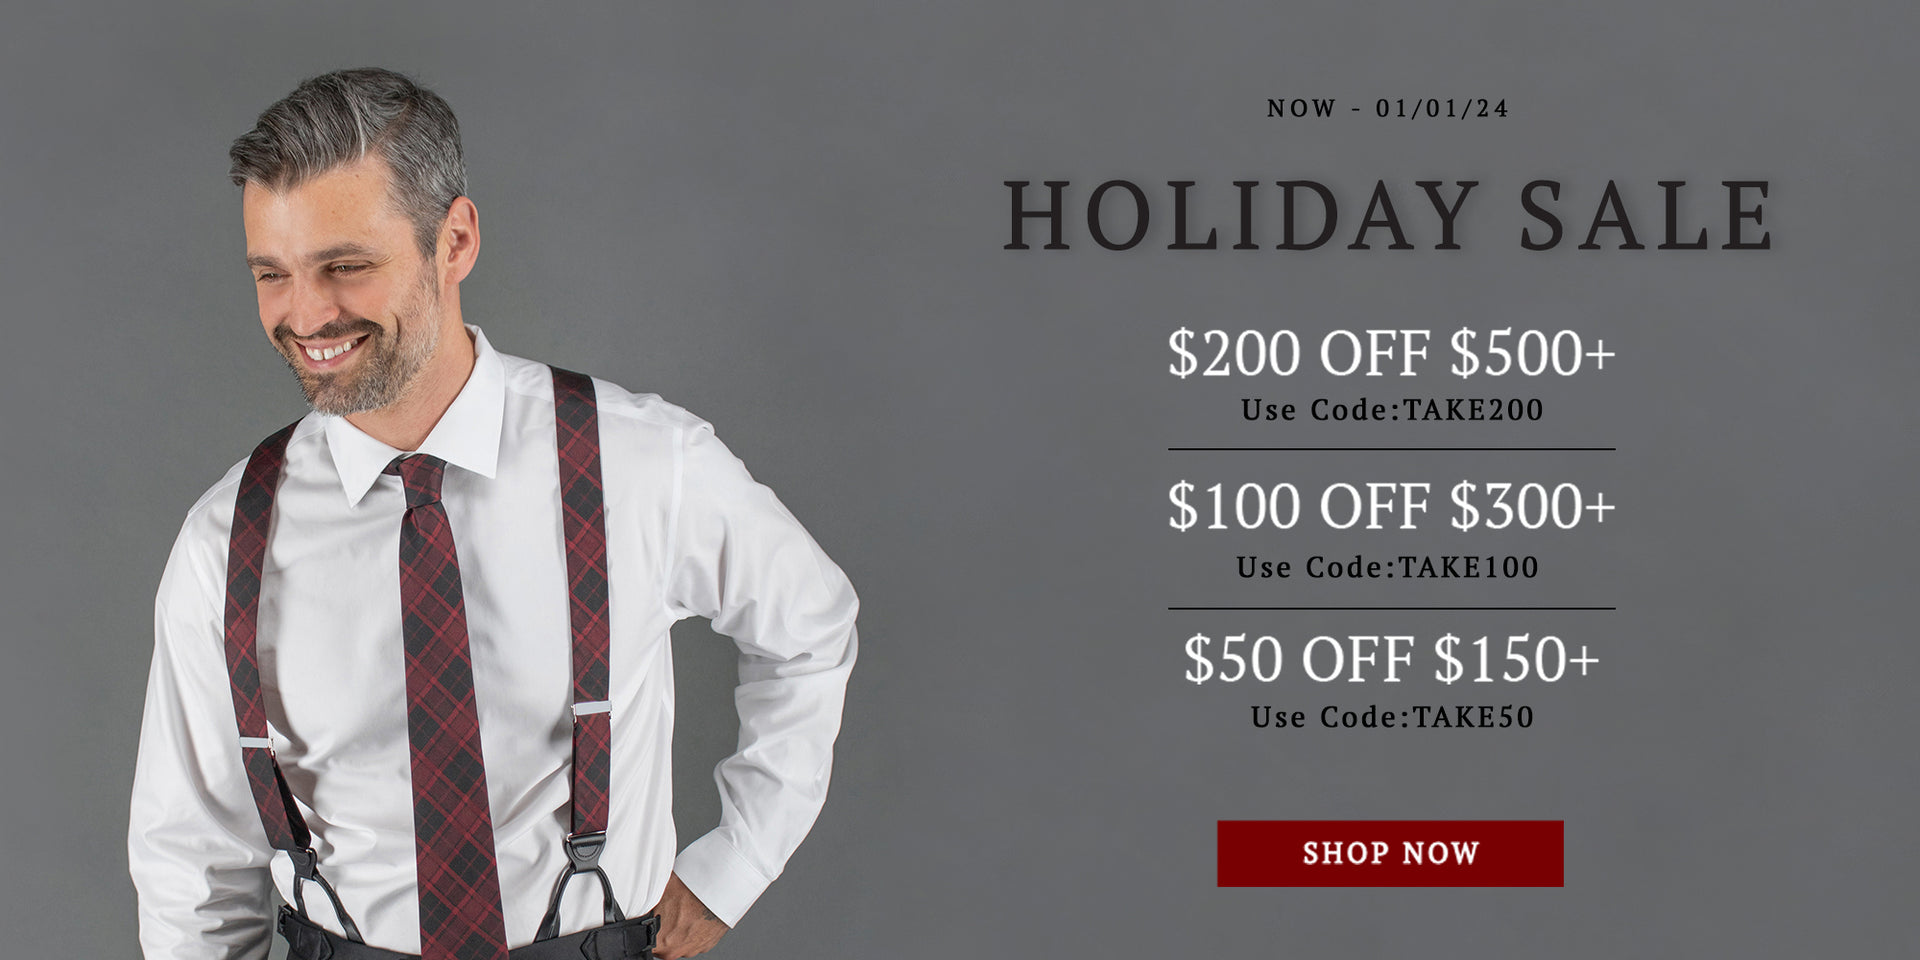 Holiday sale! Take $200 off $500+ with code TAKE200 , $100 off $300+ with code TAKE100, and $50 off $150+ with code TAKE50